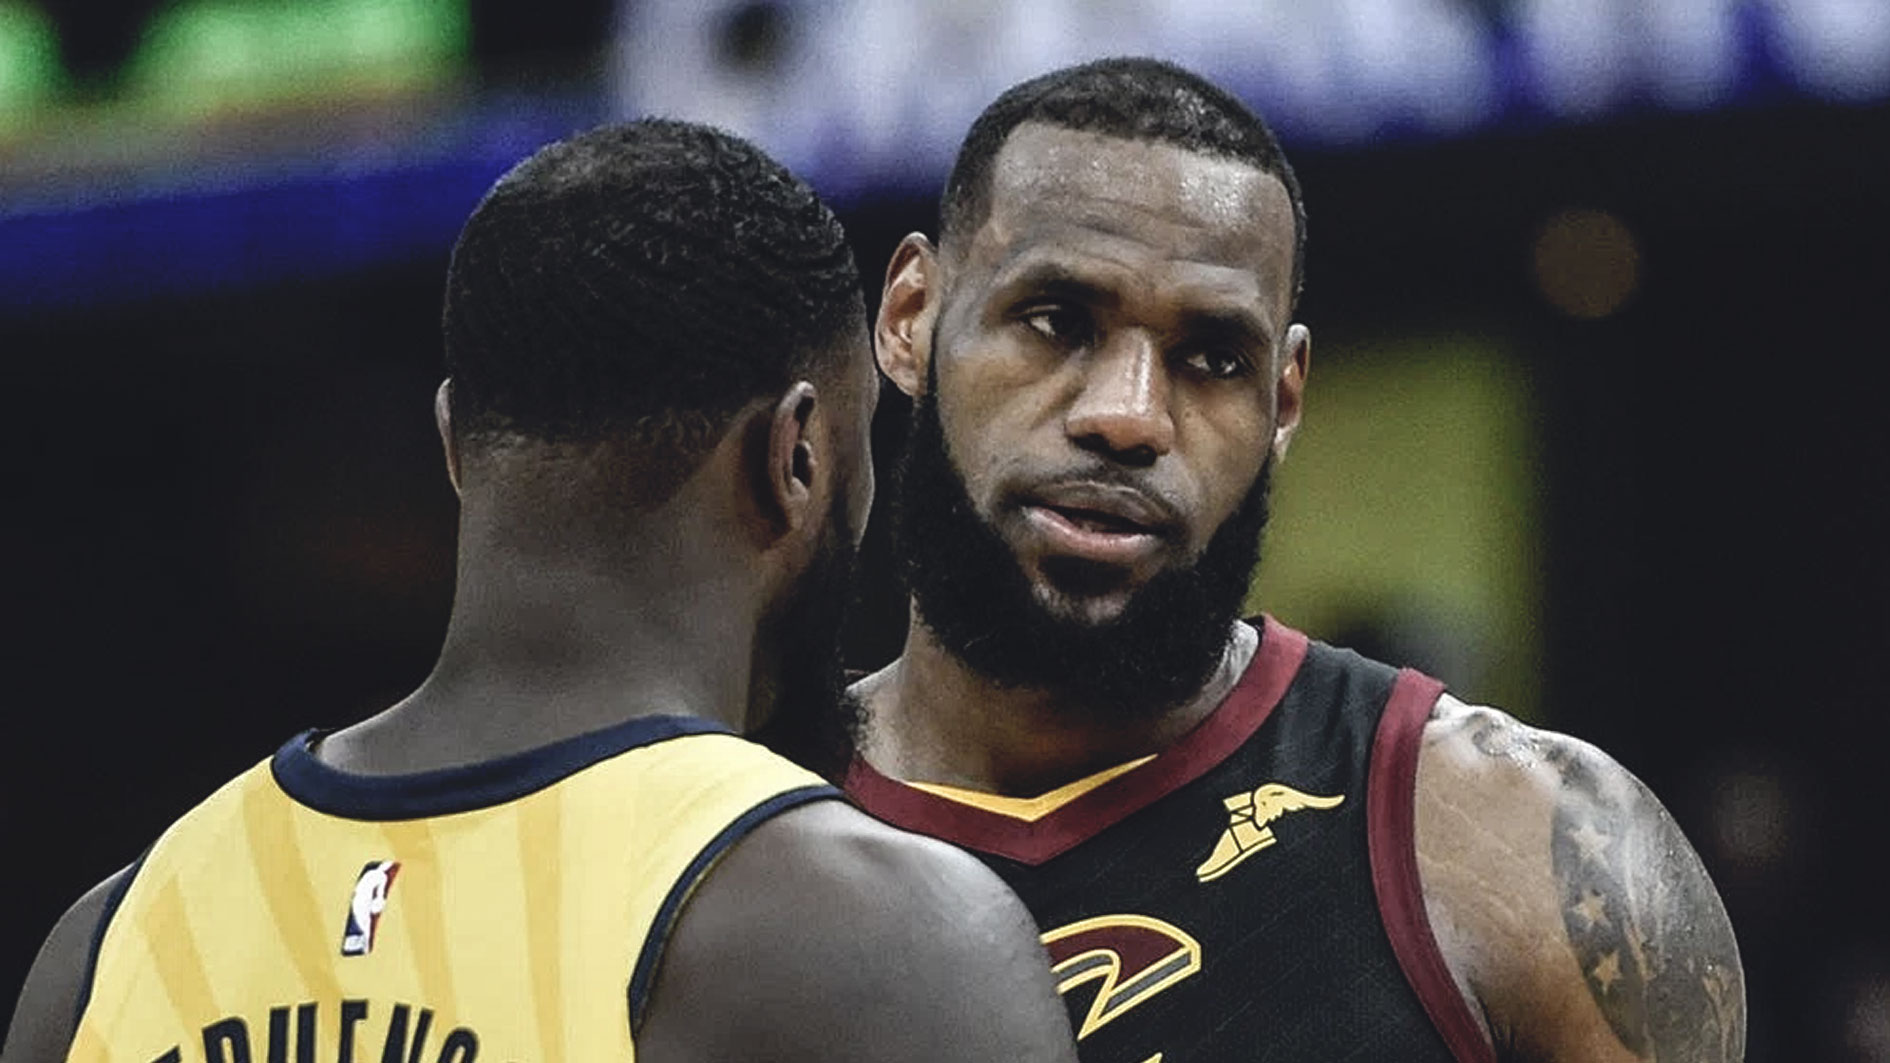 Lakers: LeBron James says will be a time when he responds to trash